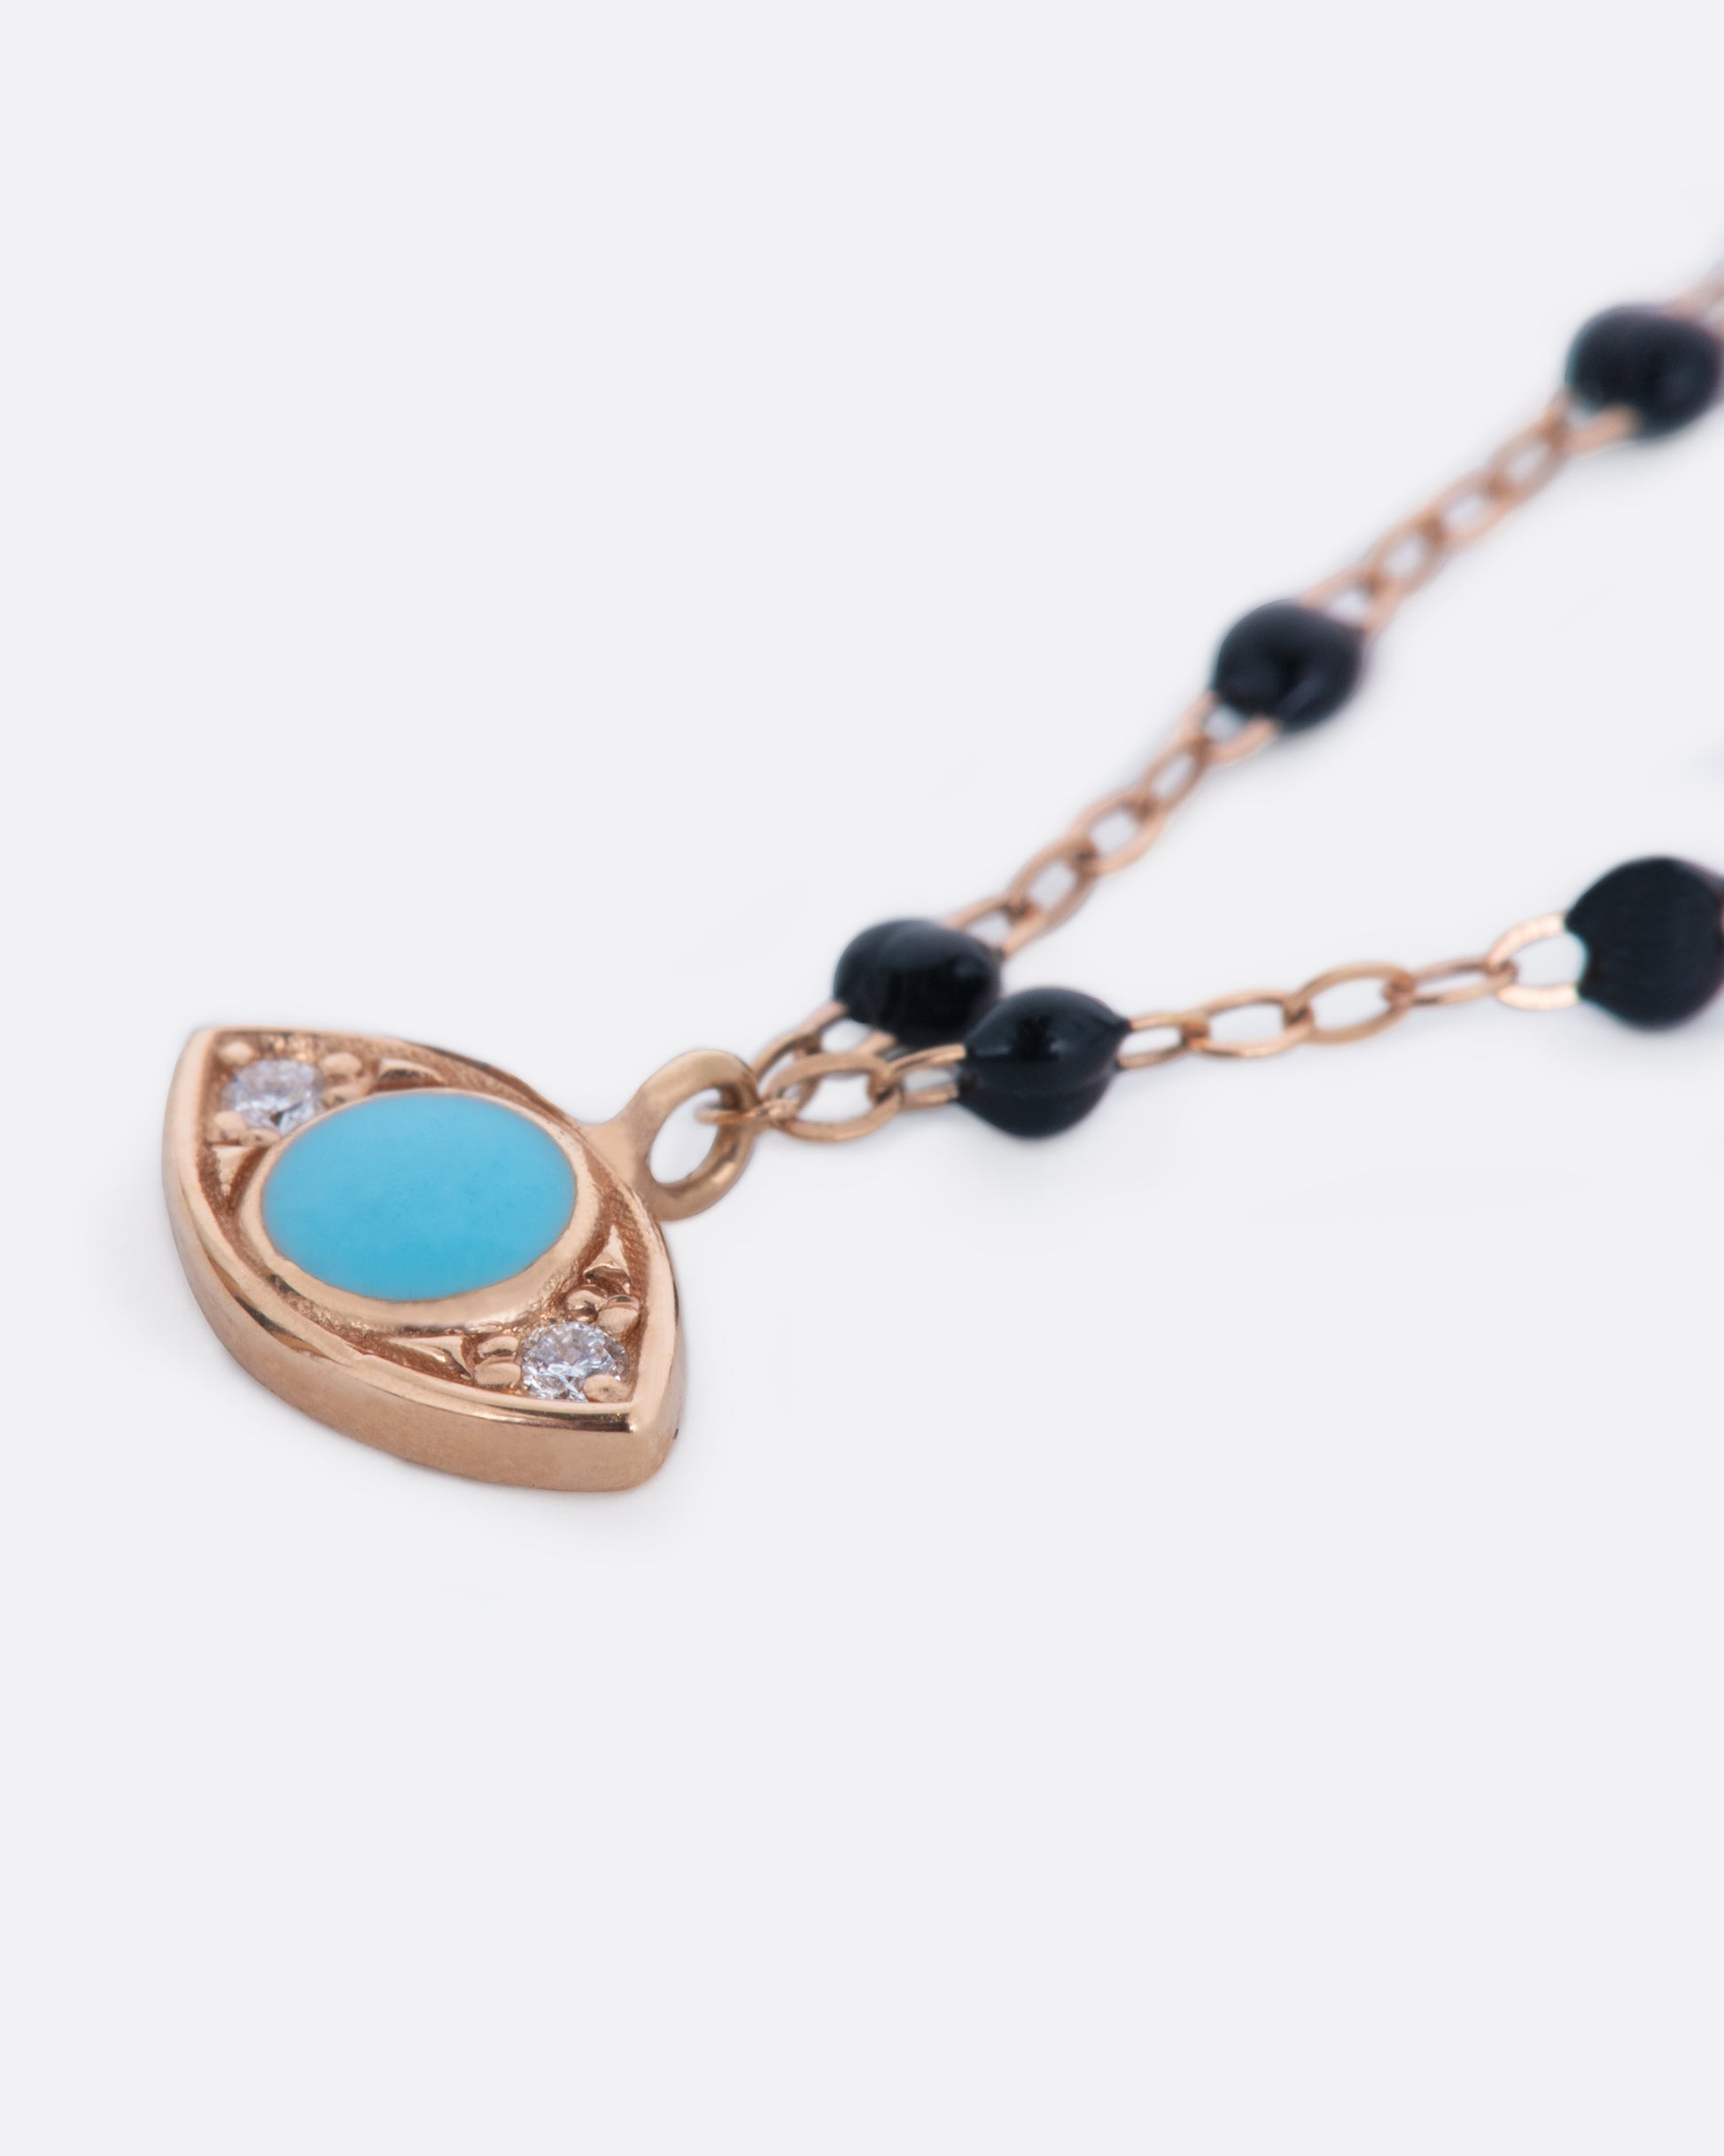 A rose gold chain necklace with black resin beads and an evil eye pendant.